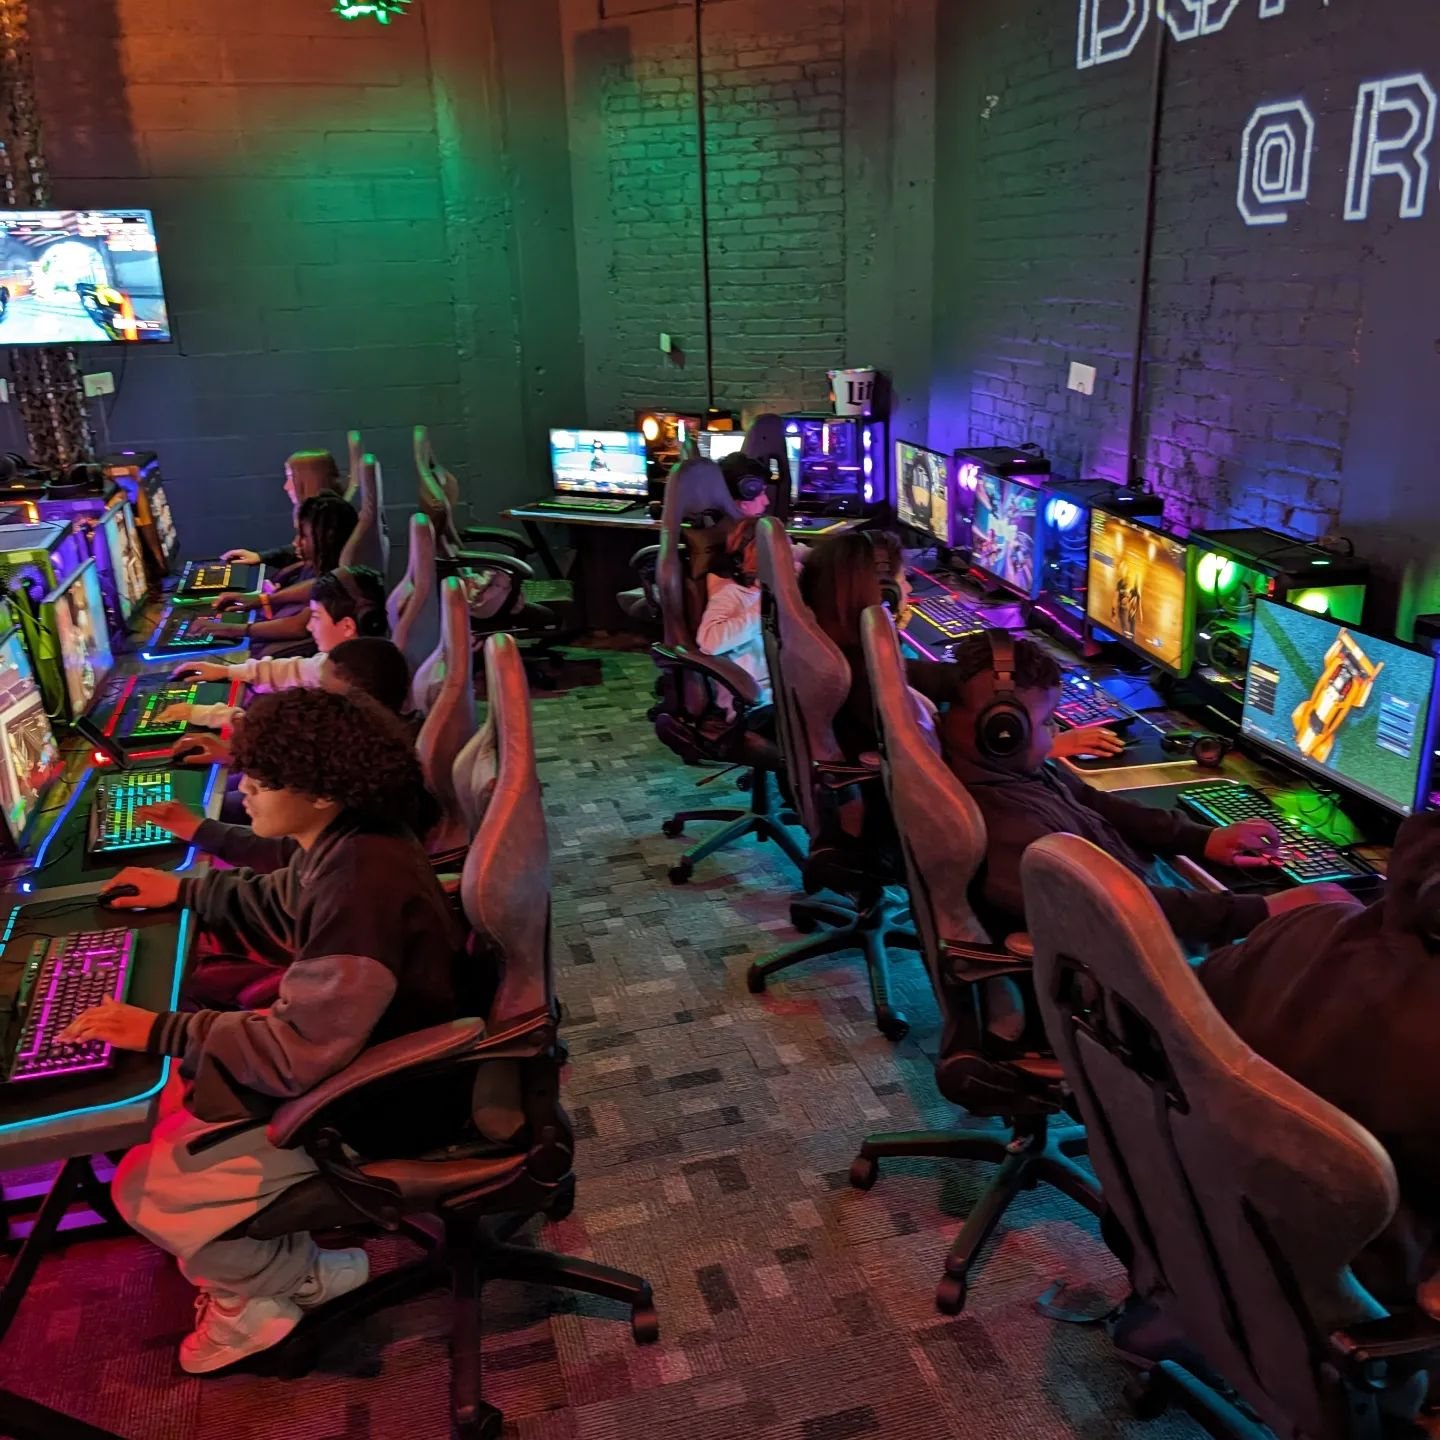 Gaming with a full house. Love to see it! Roar has a ton of love music going on this weekend so come by play 🎮 with friends and enjoy the vibe.